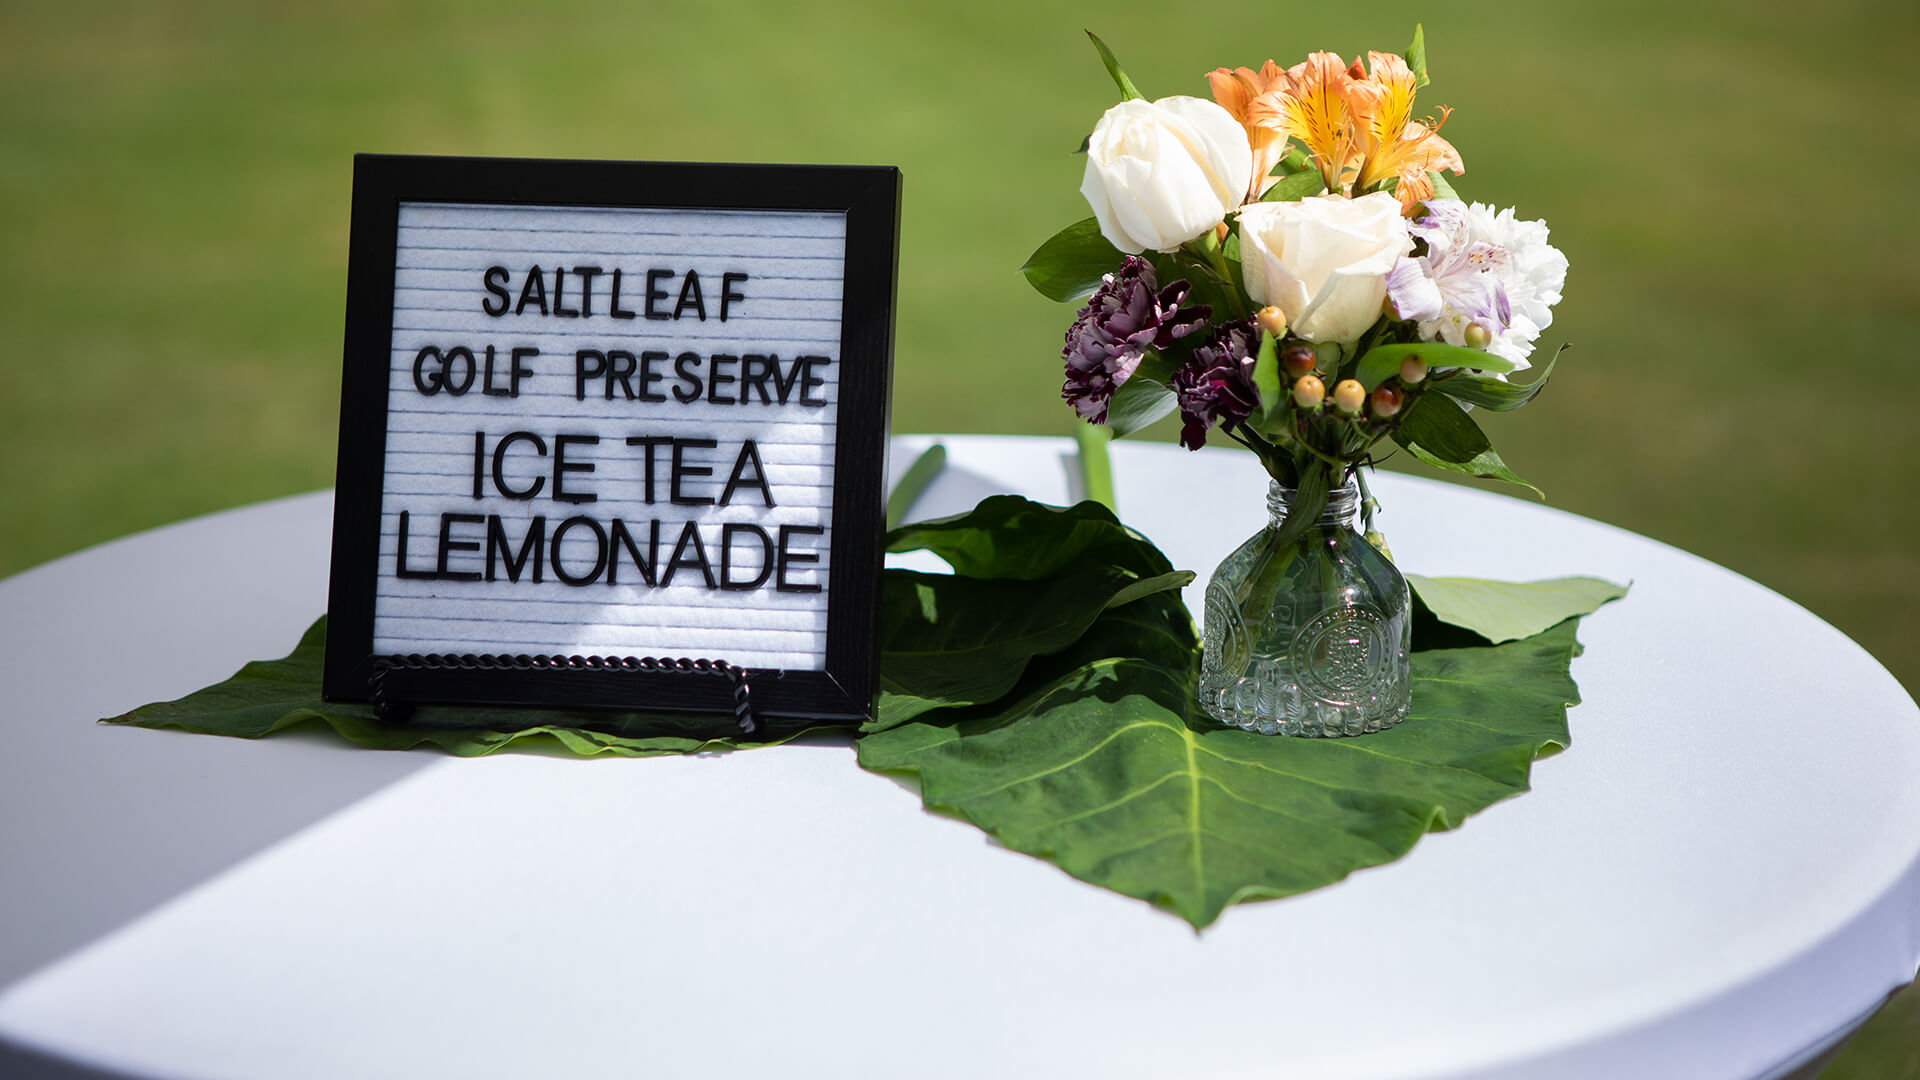 A table adorned with beautiful flowers and a sign that says "ice tea lemonade" at the Saltleaf Golf Preserve in Bonita Springs, offering a refreshing break after playing a round at this